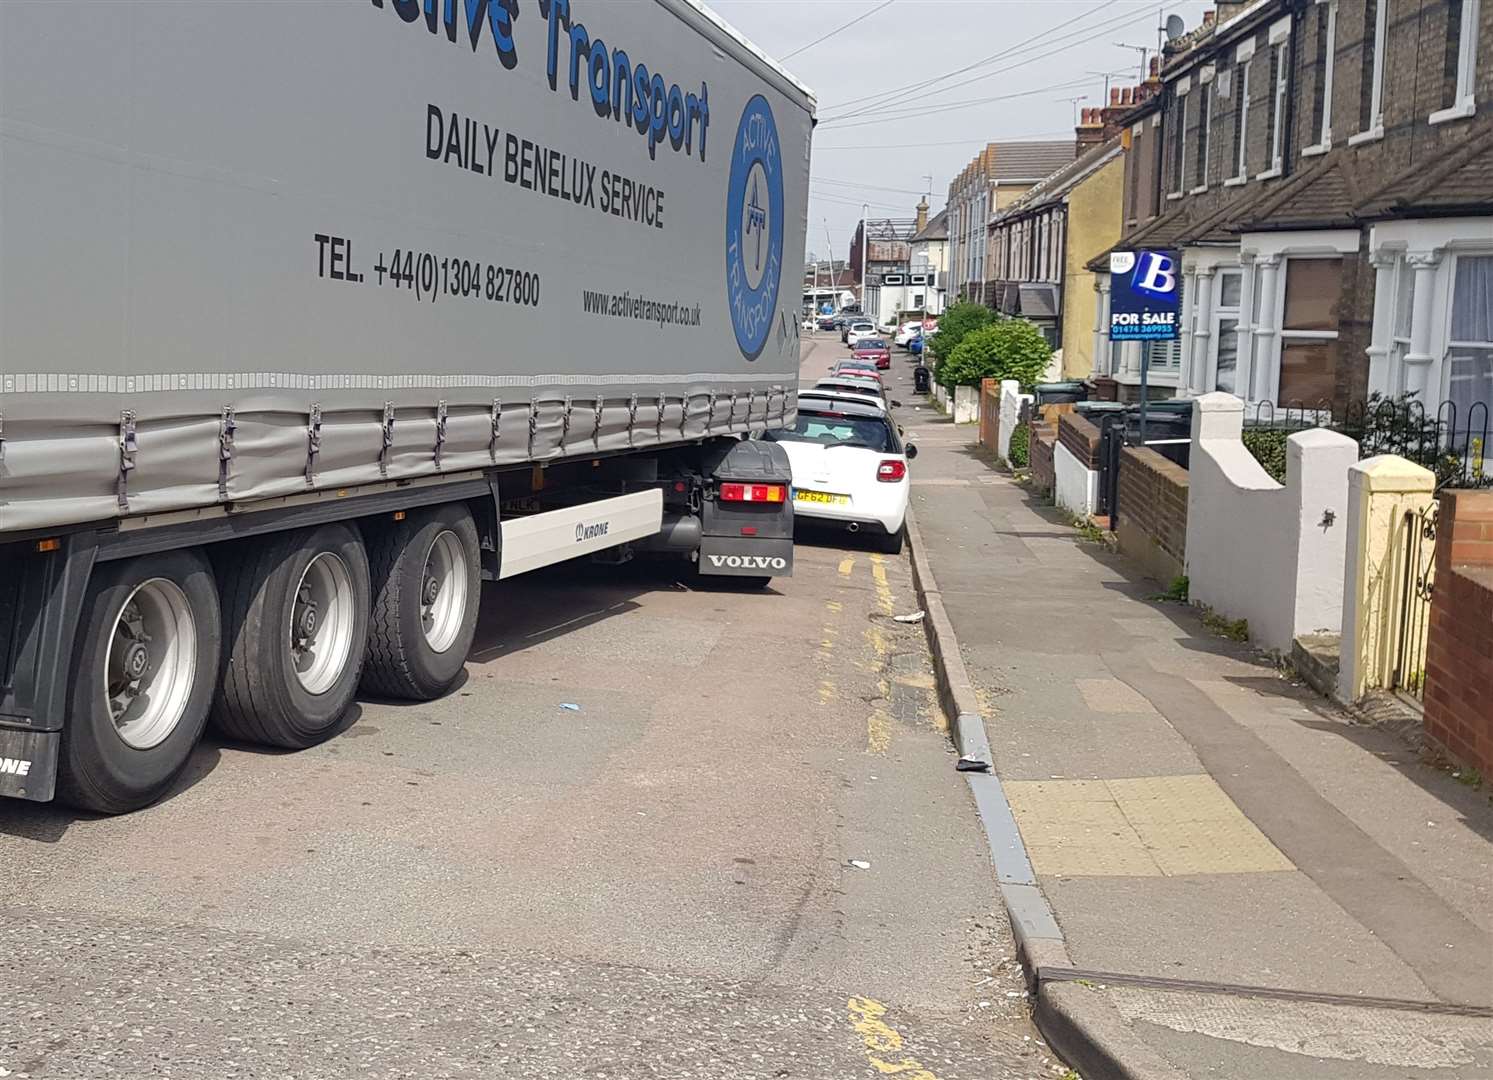 HGVs have been spotted trying to navigate the restrictions at the junction of Albion Terrace and Russell Road